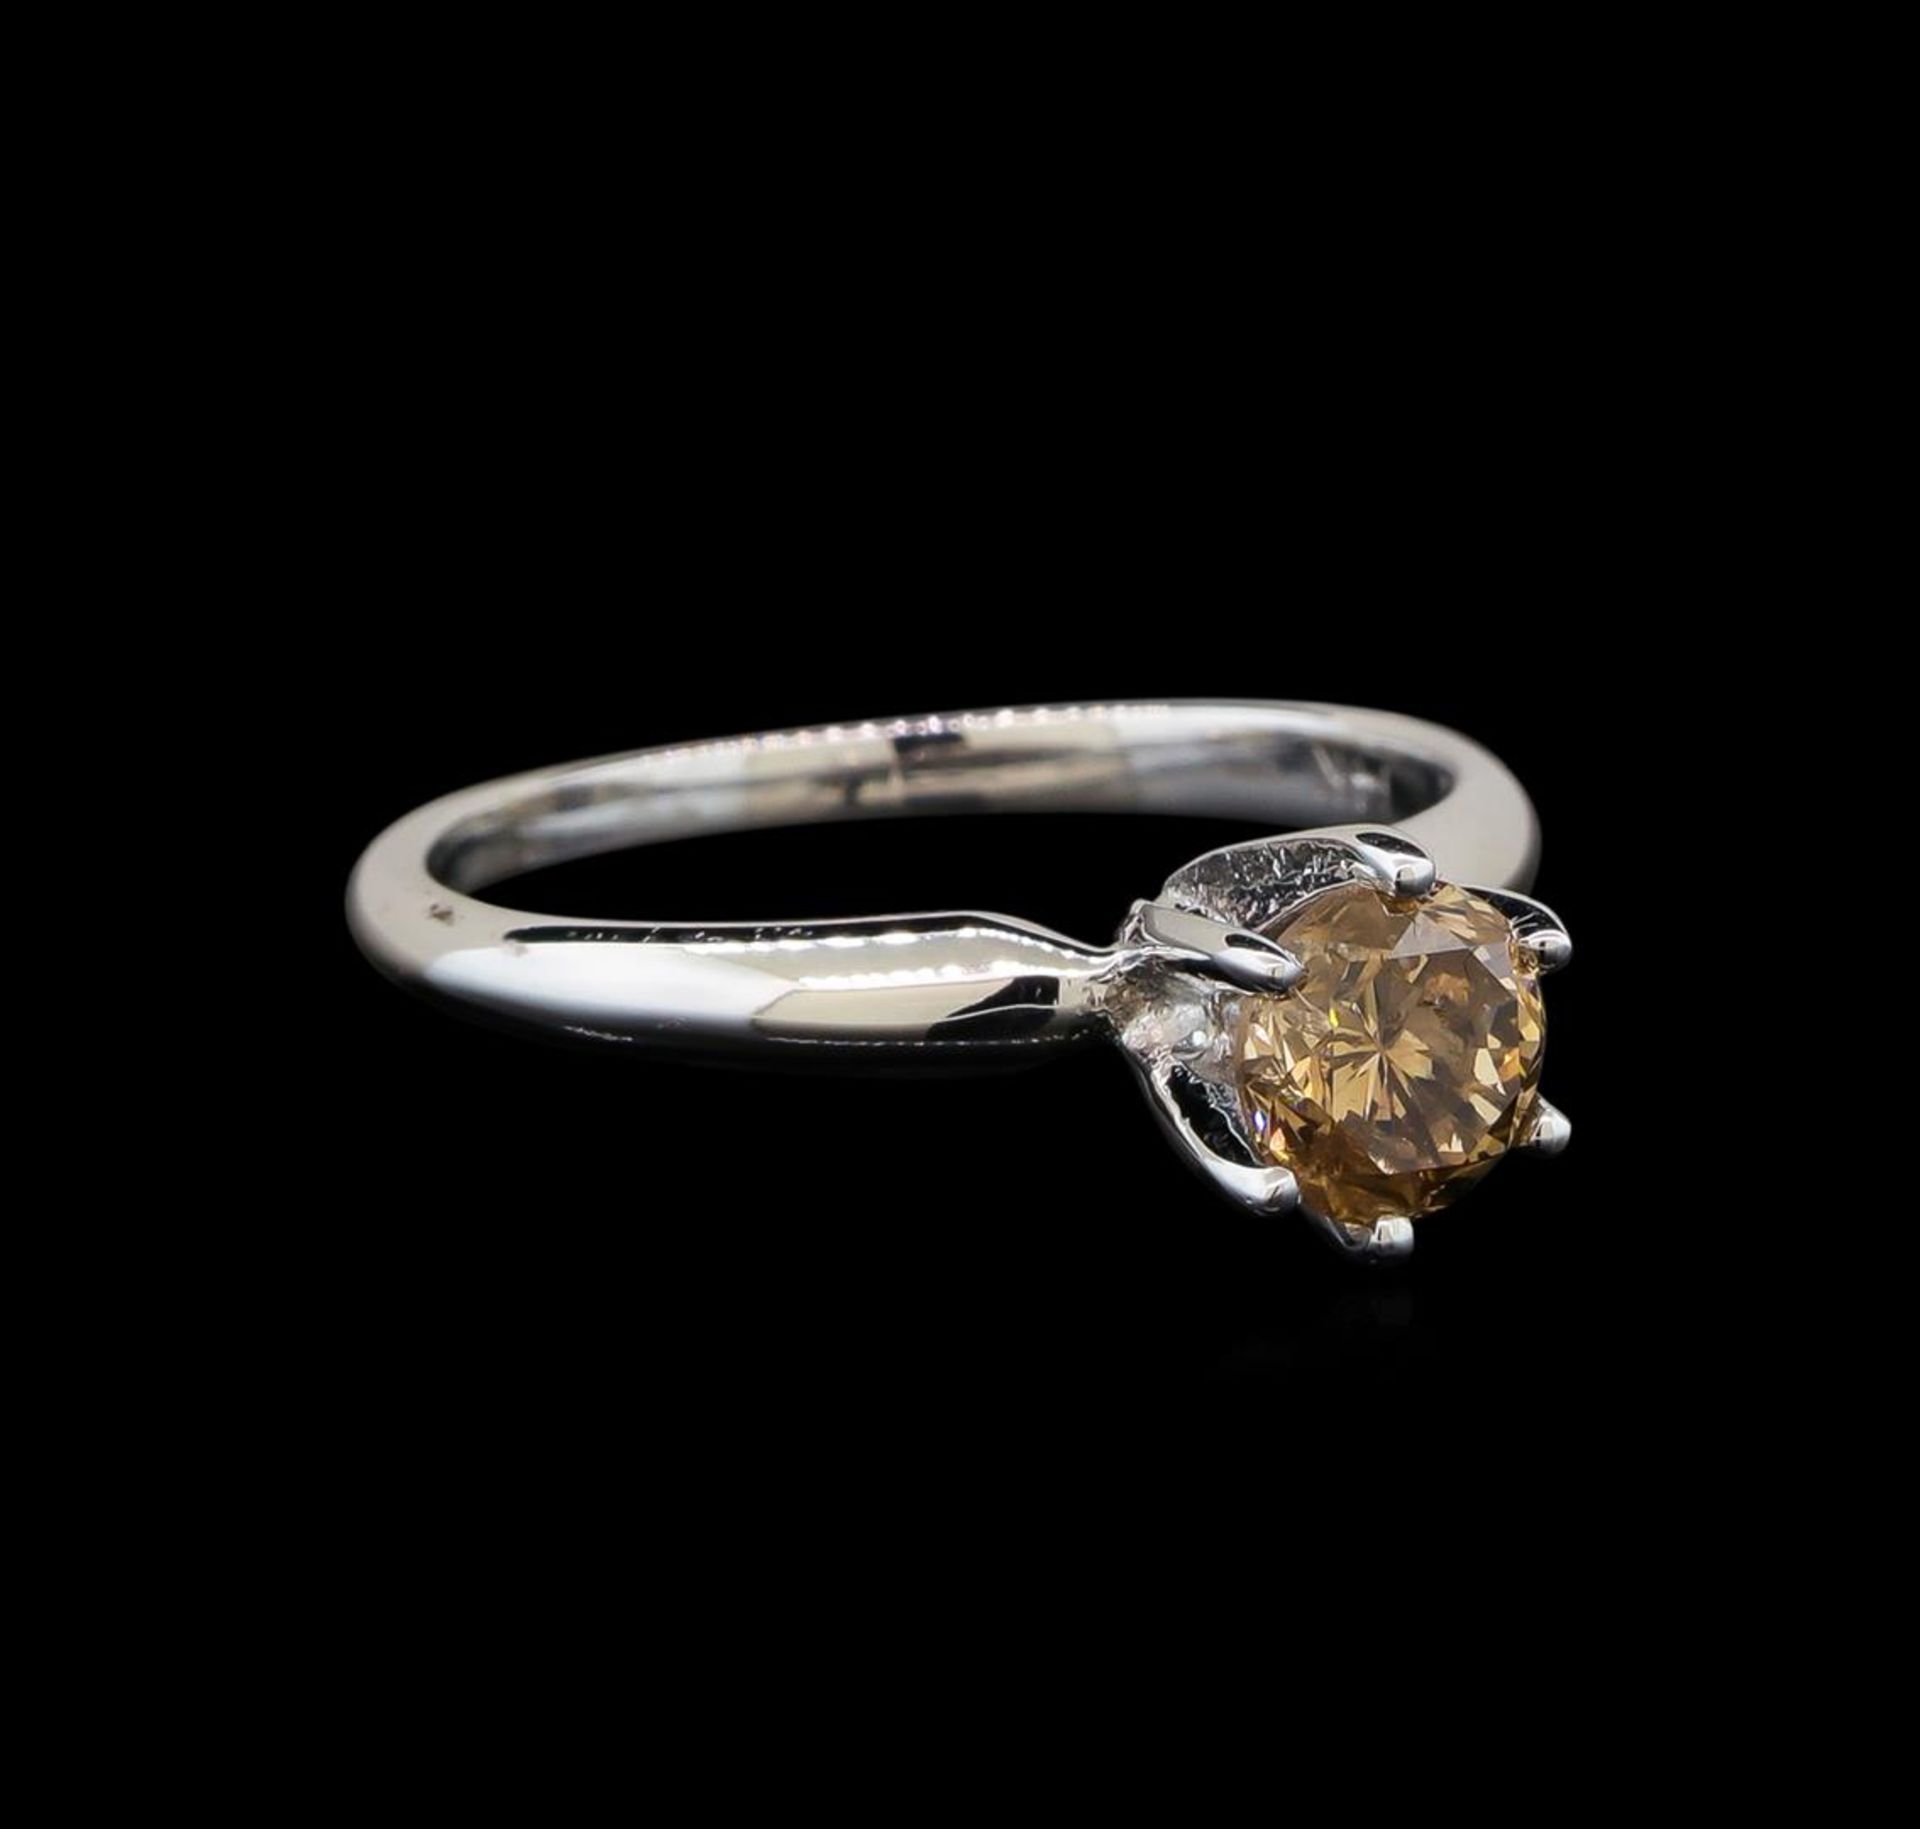 14KT White Gold 0.80 ct Round Cut Fancy Brown Diamond Solitaire Ring